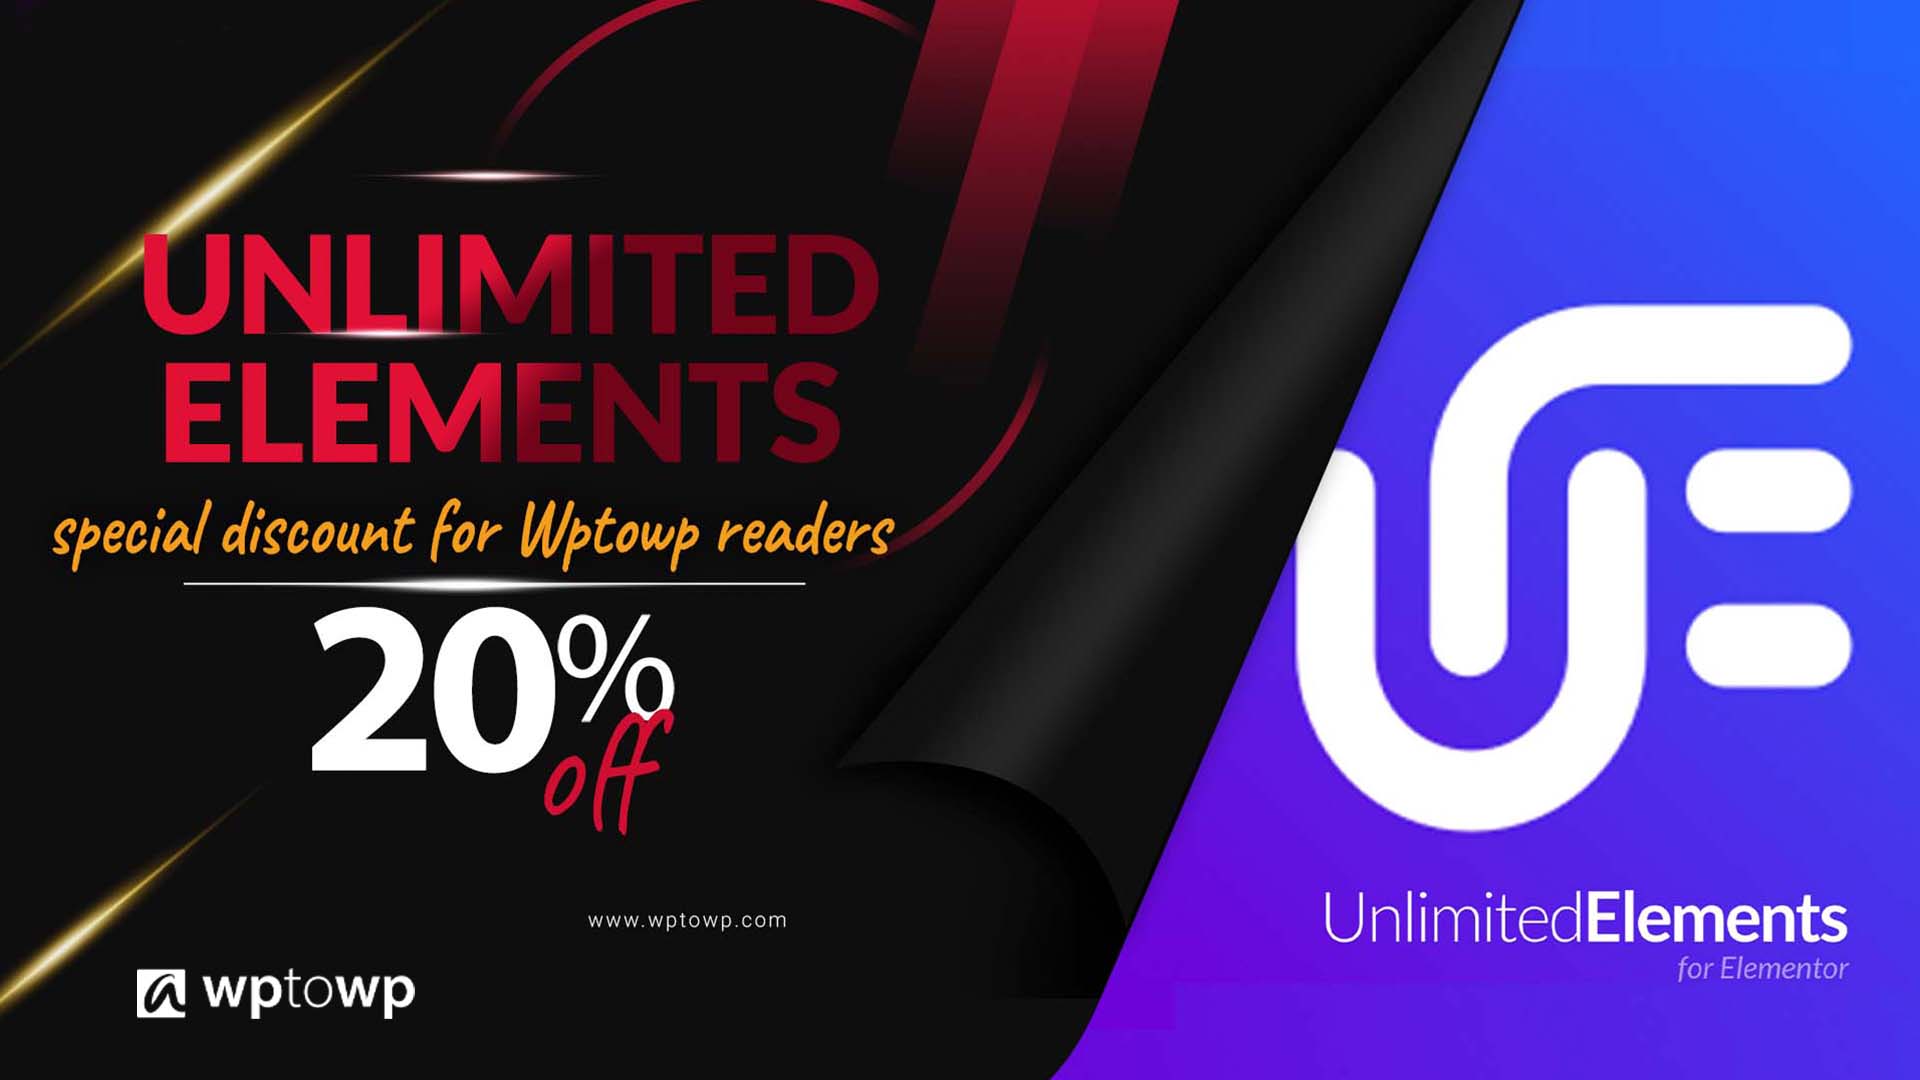 Unlimited Elements Coupon Code, Unlimited Elements Coupon Code, wptowp